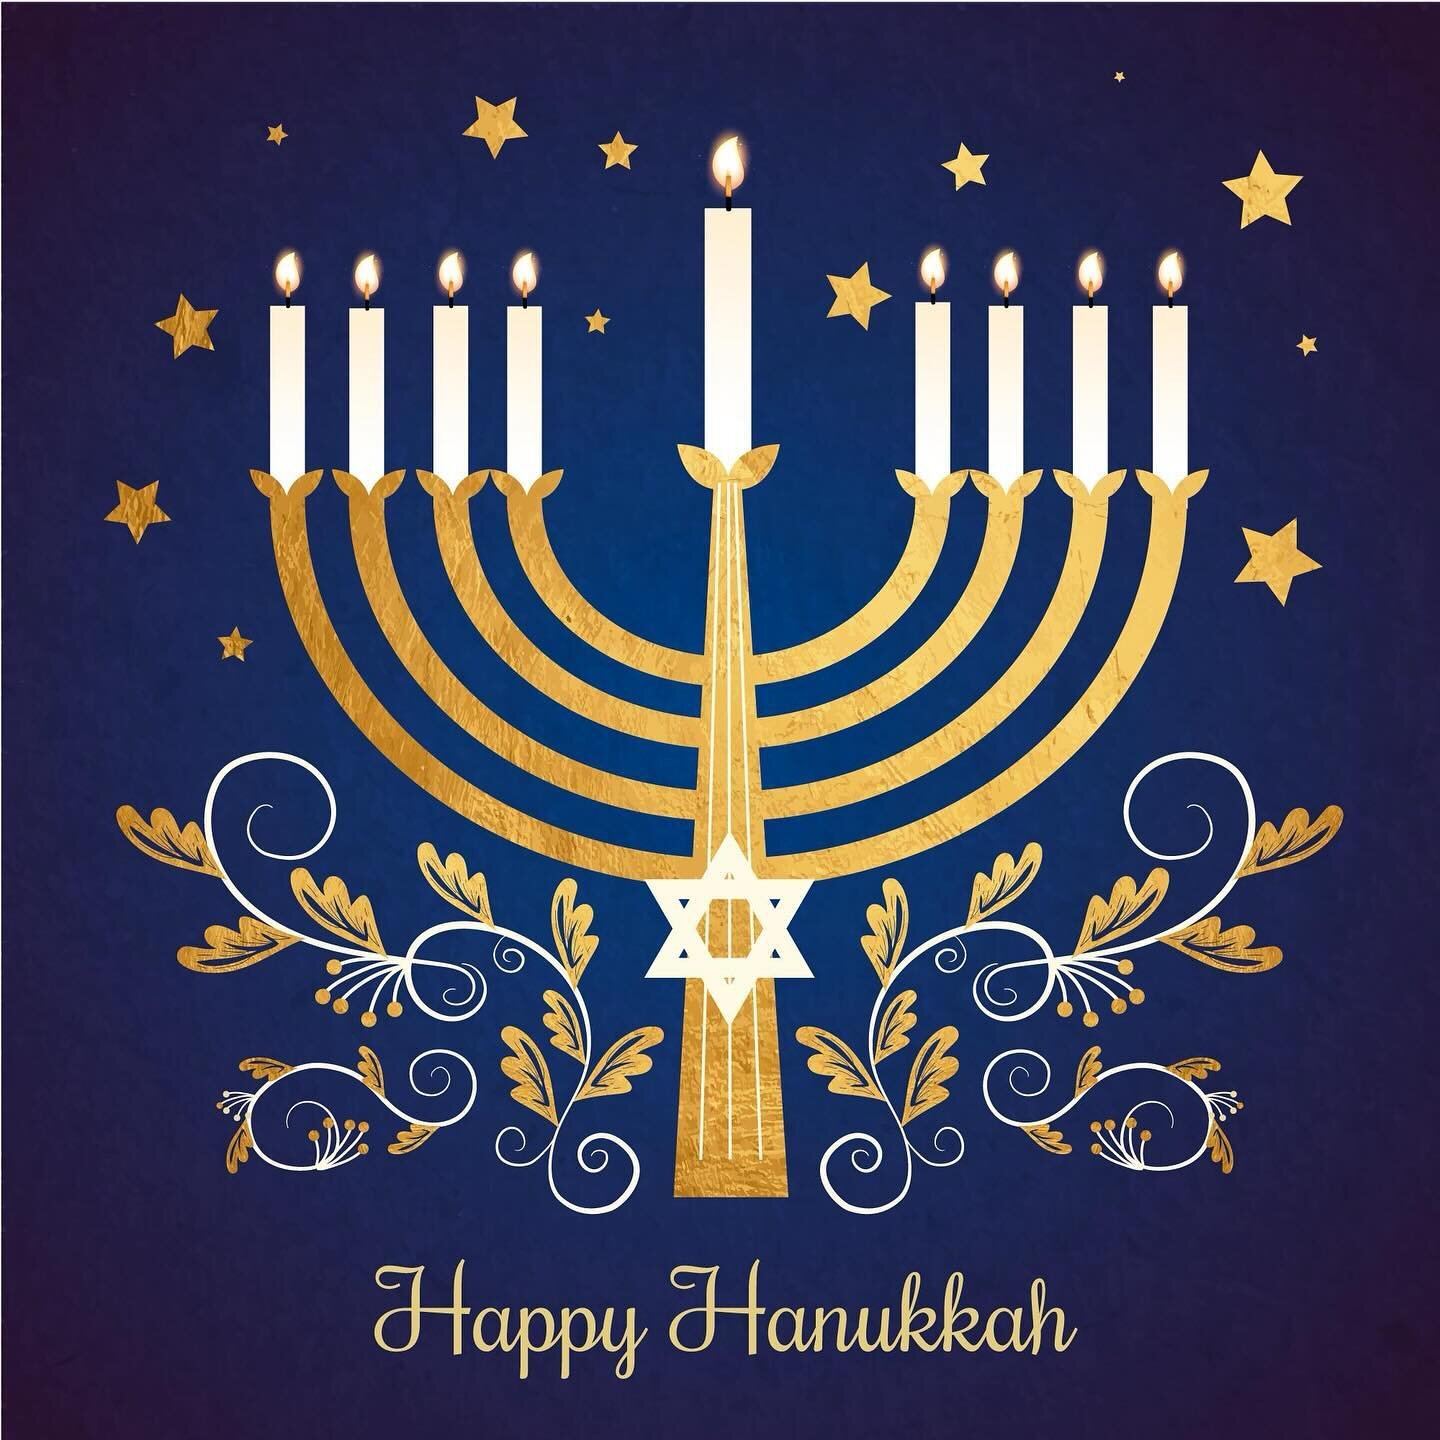 🕎 Wishing a joyful Hanukkah to all our students and their families who celebrate! May this Festival of Lights fill your days with music, happiness, and moments of togetherness. 🎹🎶✨ #HappyHanukkah #MusicJoy #MalibuWestlakeMusic
#malibu
#westlakevil